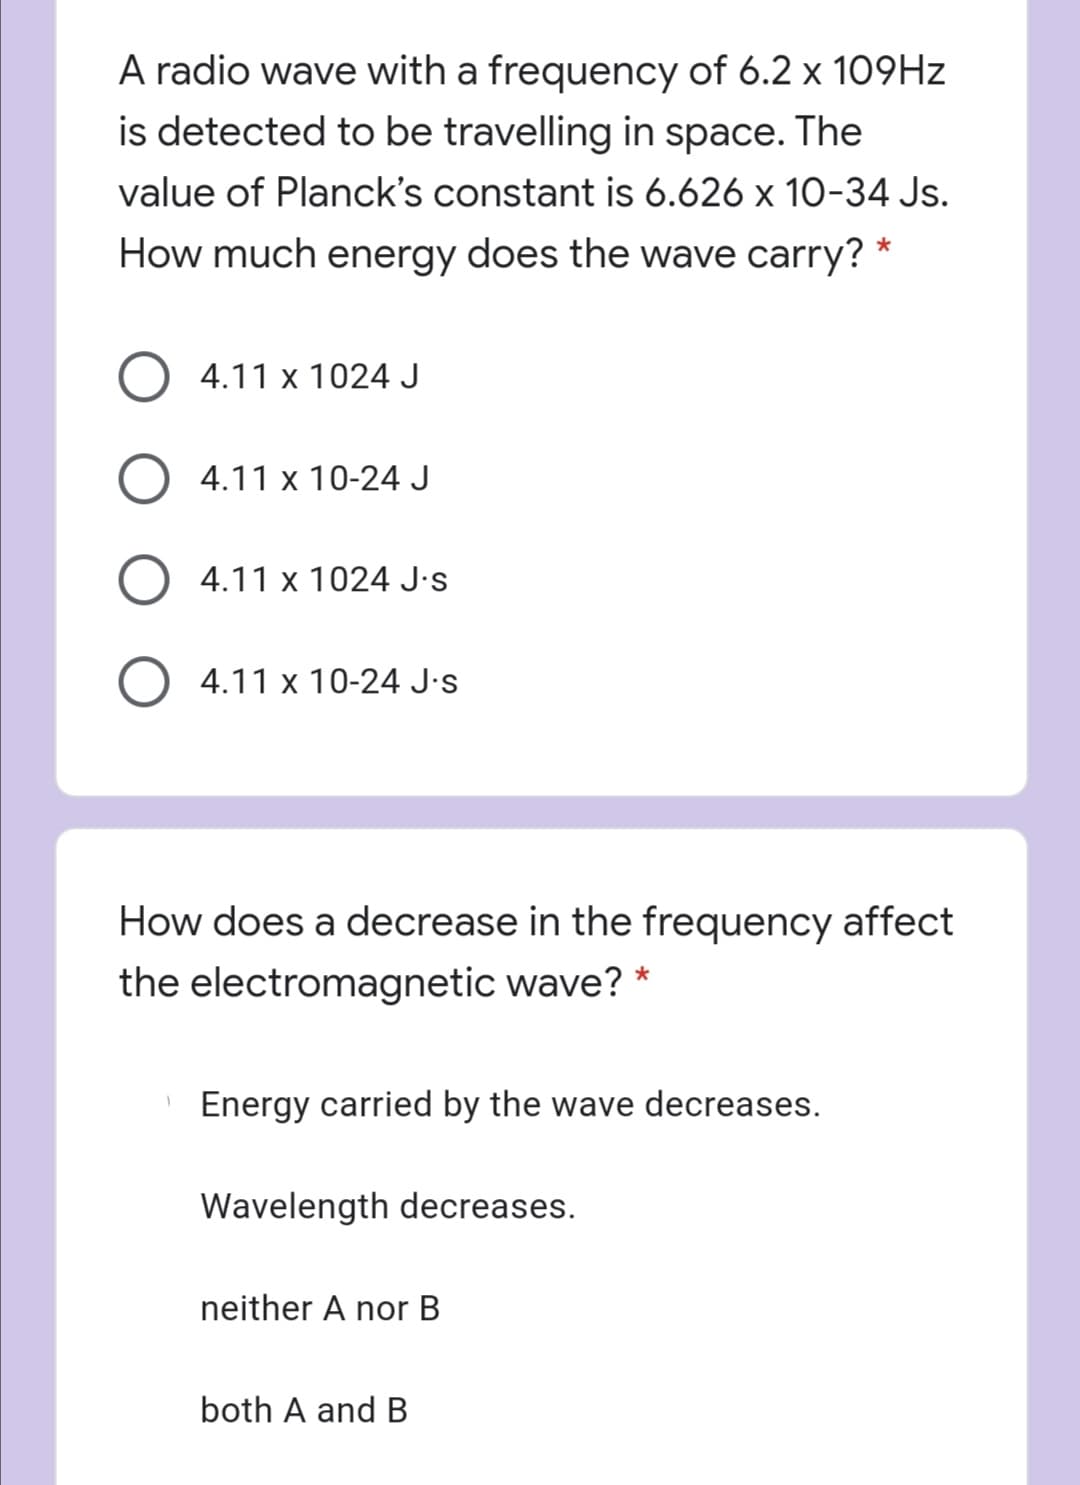 A radio wave with a frequency of 6.2 x 109HZ
is detected to be travelling in space. The
value of Planck's constant is 6.626 x 10-34 Js.
How much energy does the wave carry? *
4.11 x 1024 J
4.11 x 10-24 J
4.11 x 1024 J•s
4.11 x 10-24 J•s
How does a decrease in the frequency affect
the electromagnetic wave? *
Energy carried by the wave decreases.
Wavelength decreases.
neither A nor B
both A and B
